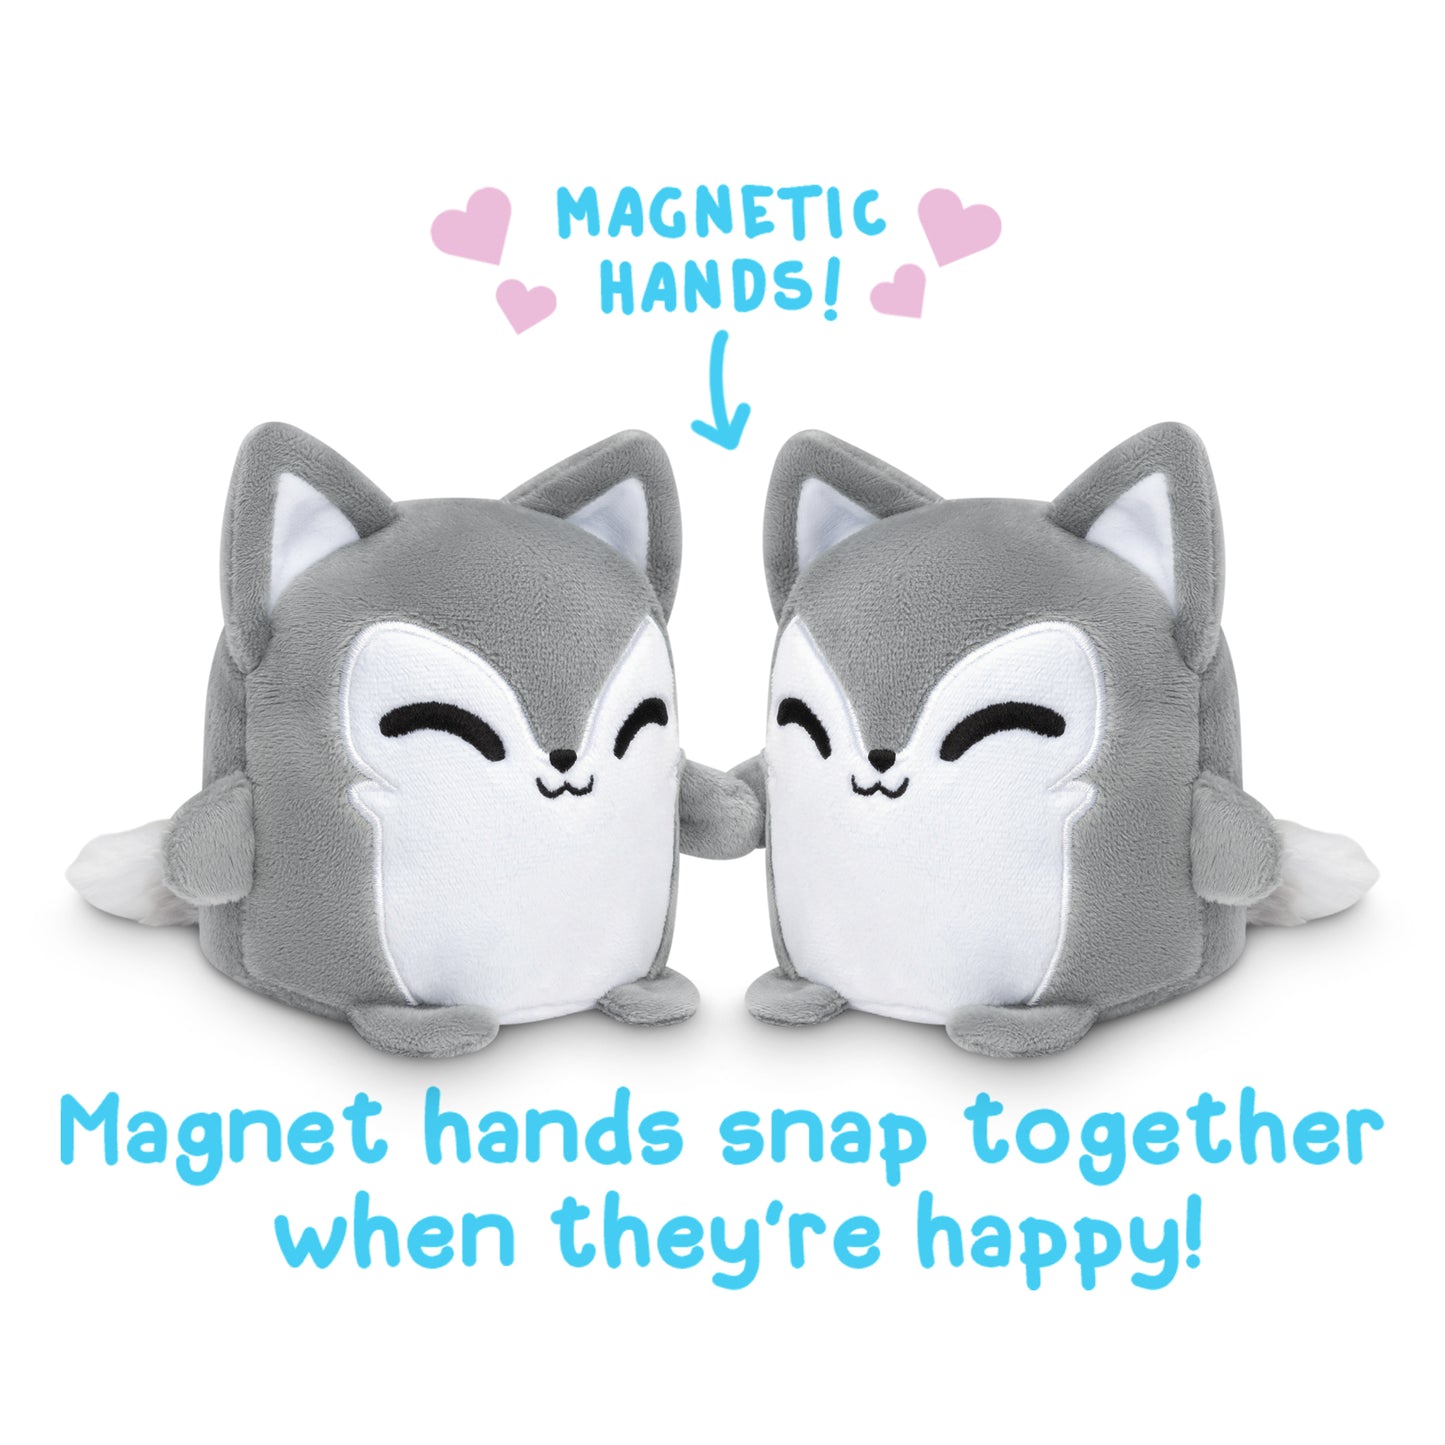 Two foxes, called TeeTurtle Reversible Wolf Plushmates, with magnetic hands that snap together when they're happy. These adorable plush toys from TeeTurtle are perfect for cuddling and play.